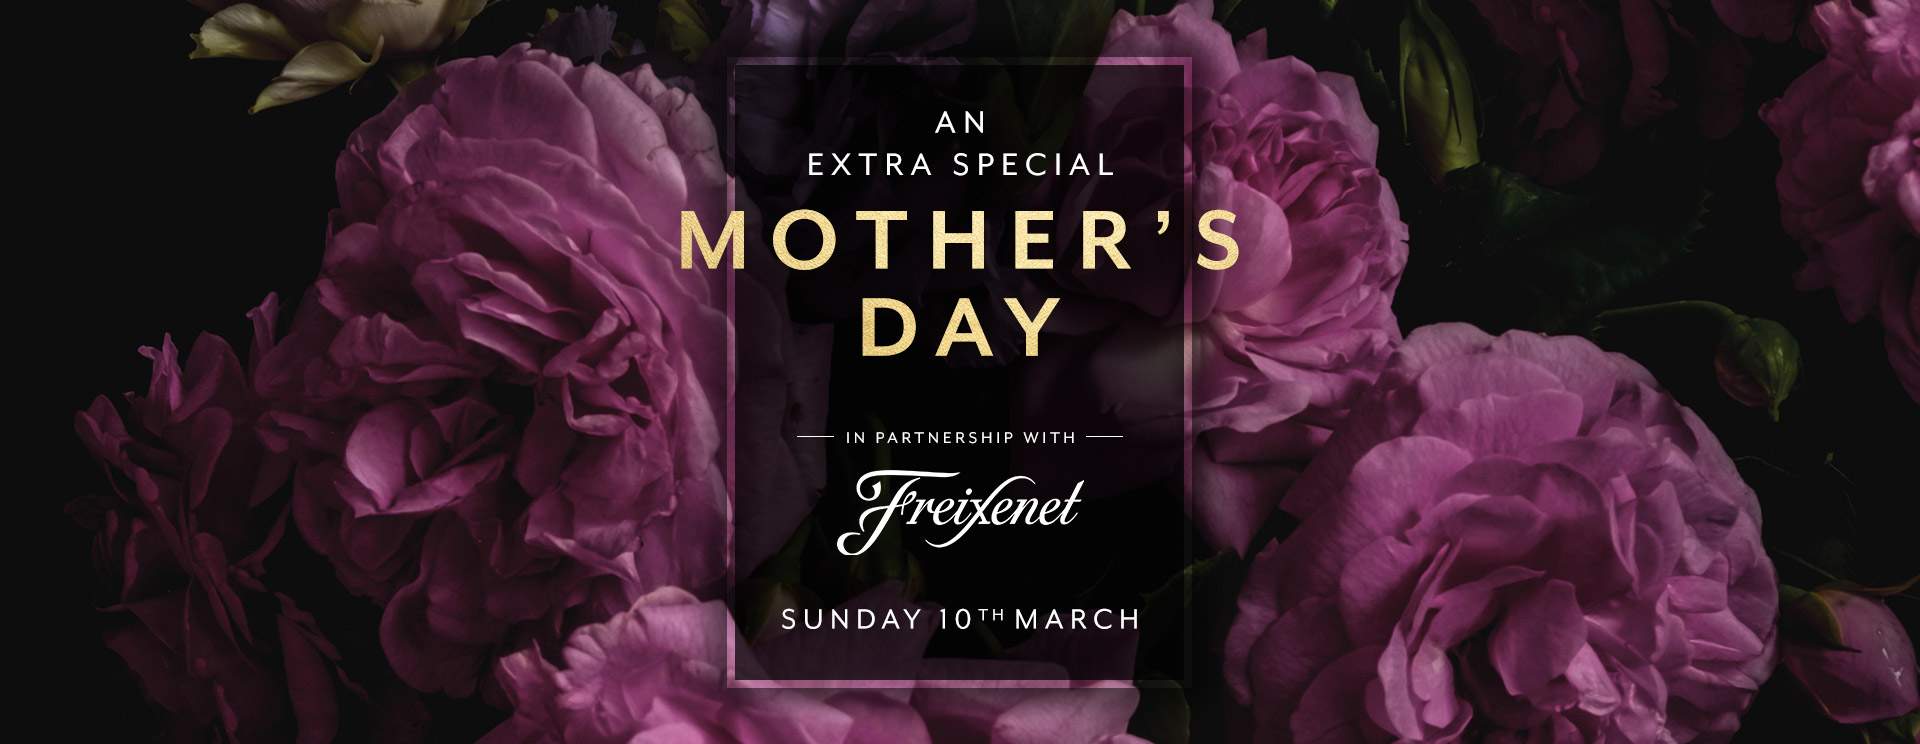 Mother’s Day menu/meal in Broadway